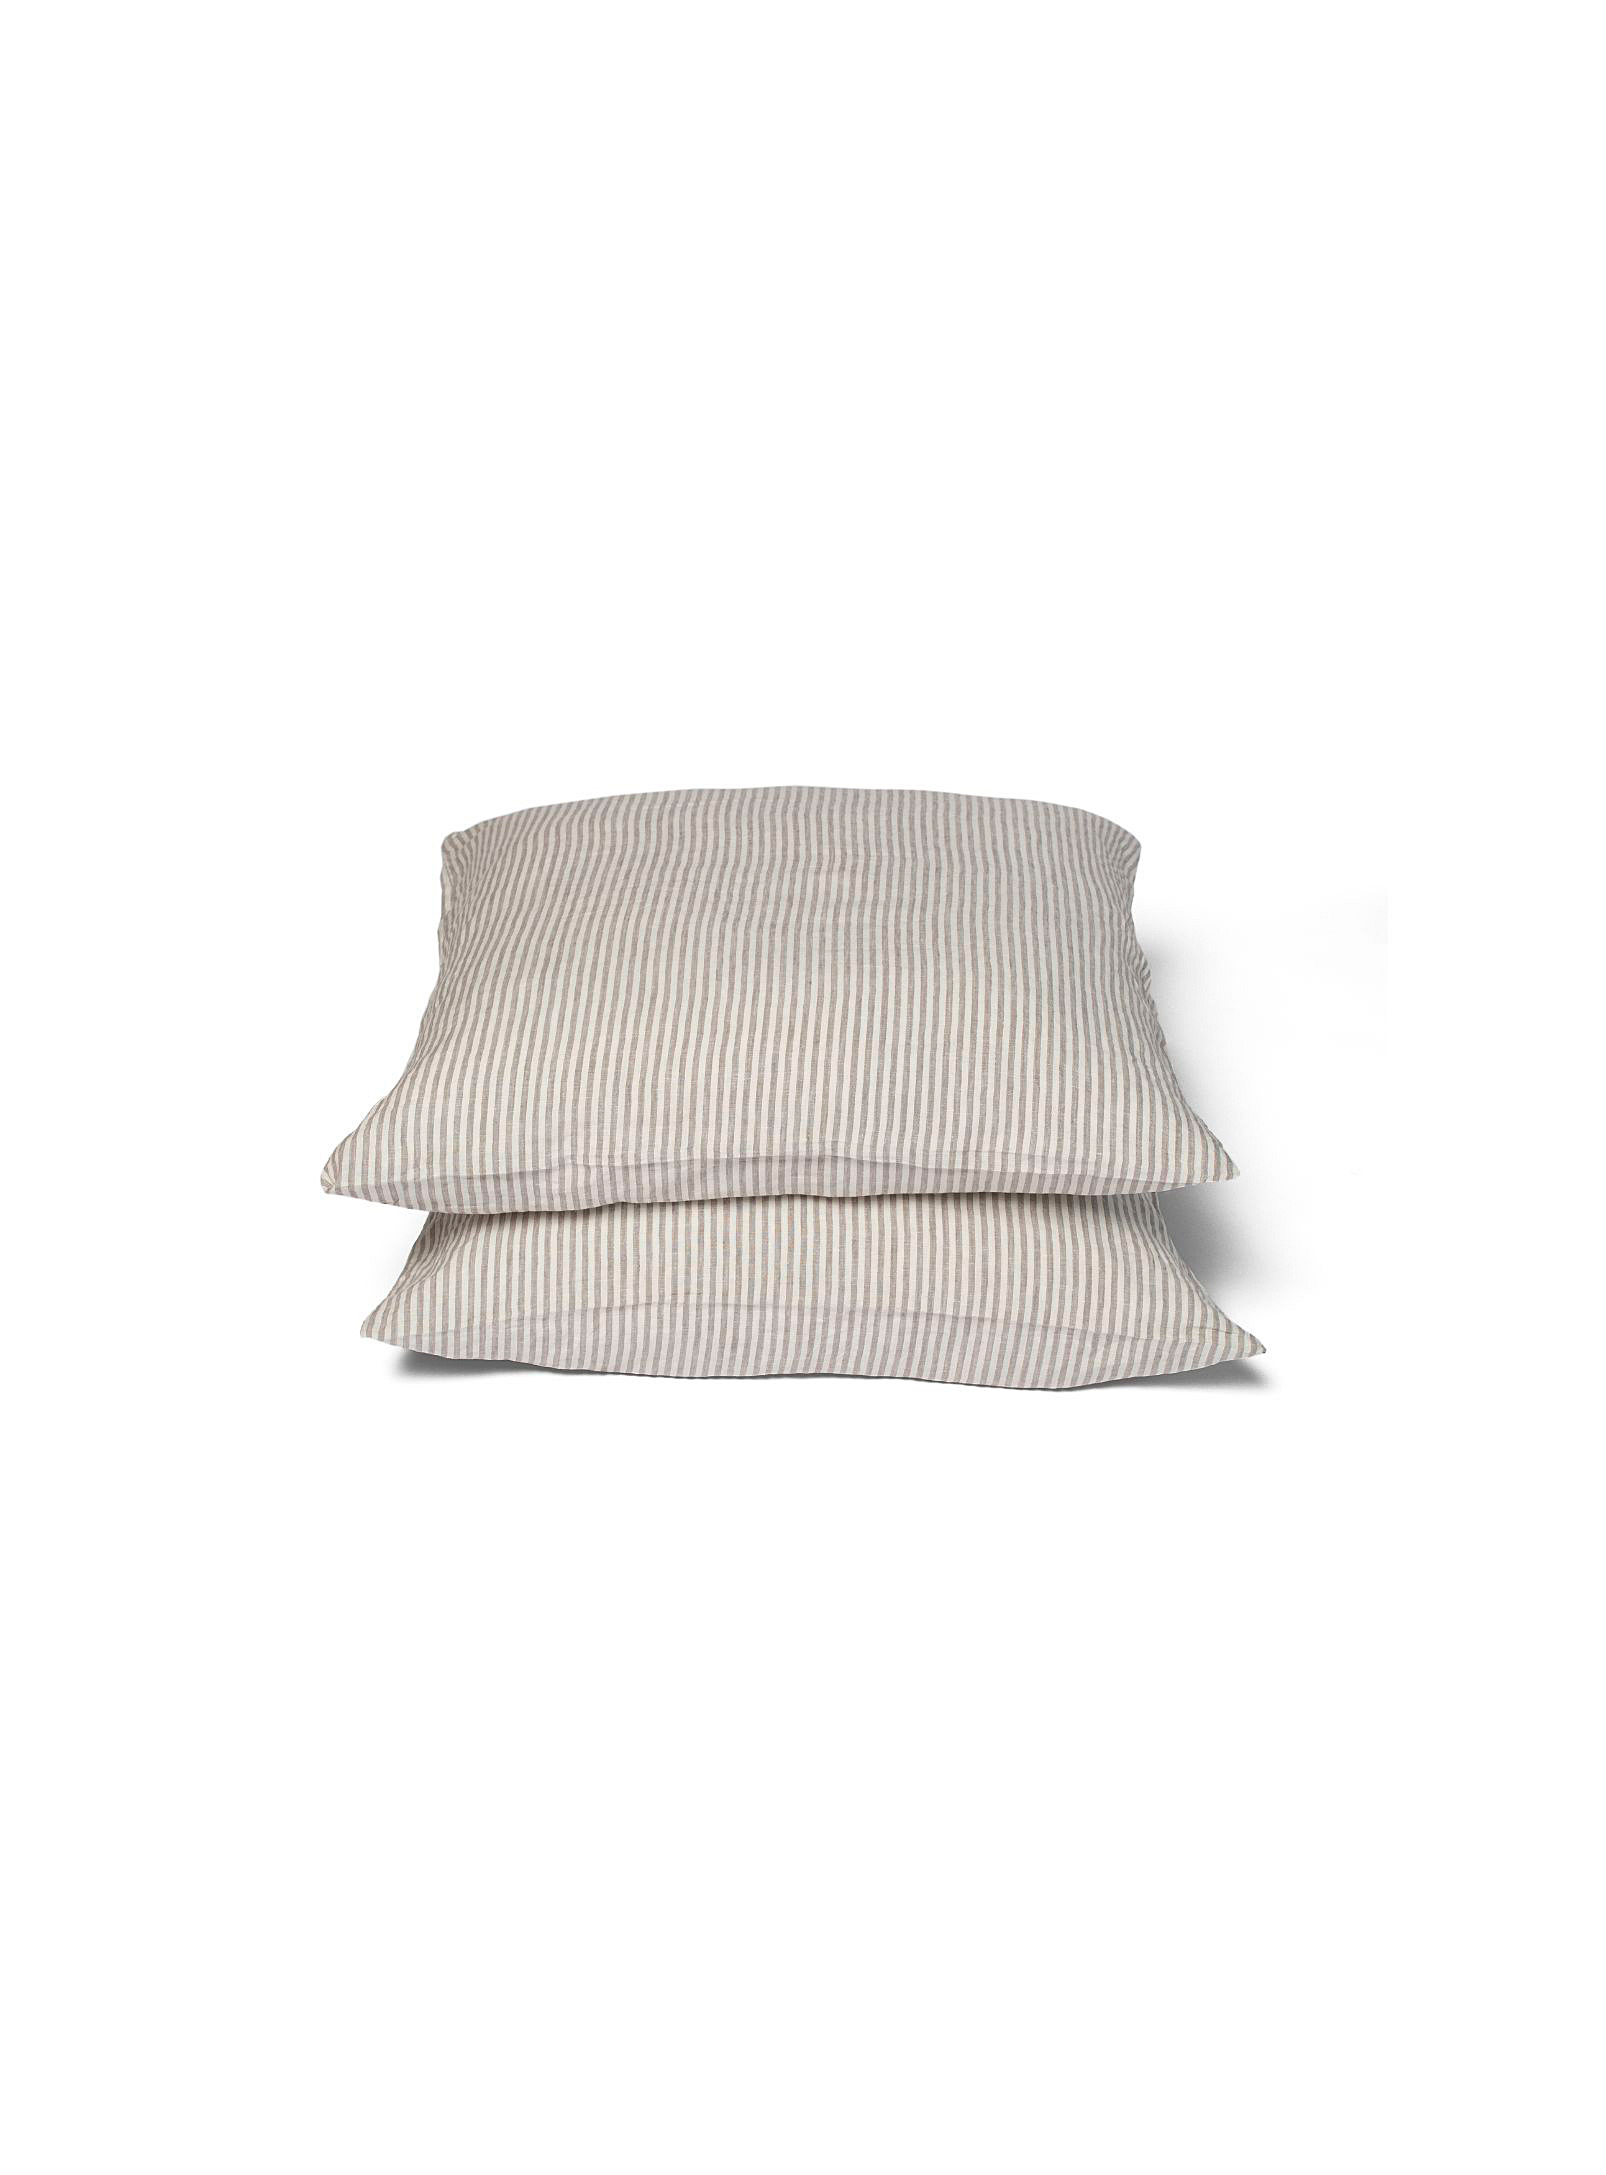 Wilet Striped Pre-washed Pure Linen Euro Pillow Shams Set Of 2 In Patterned Grey